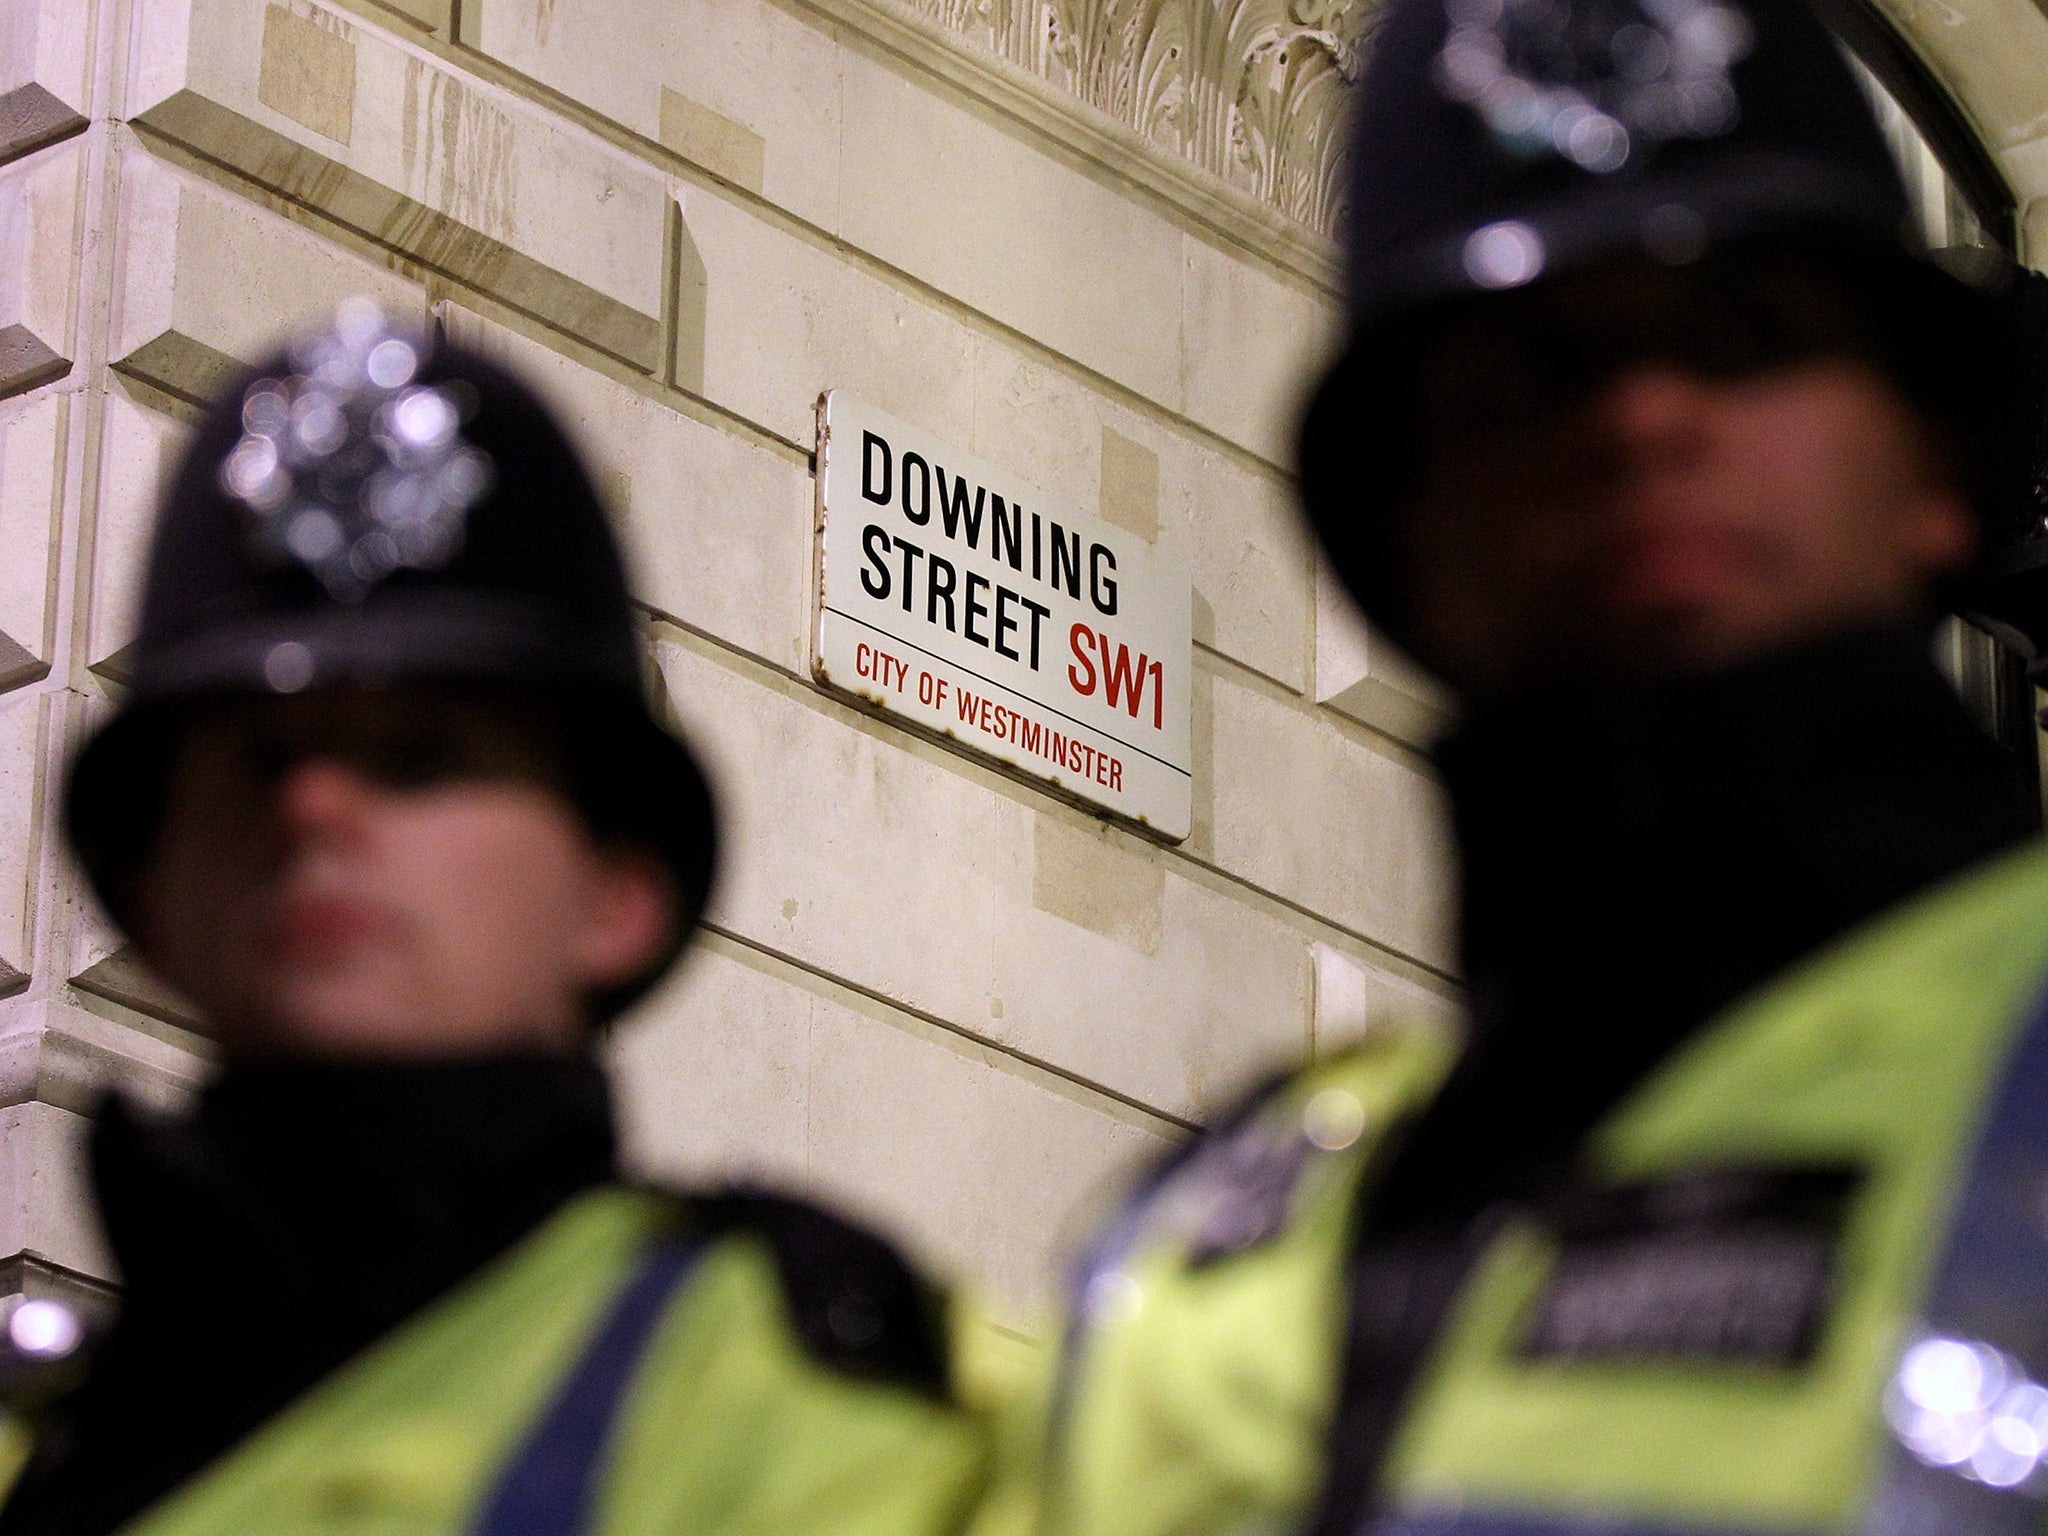 Around 17,000 front-line police jobs have already been lost since 2010